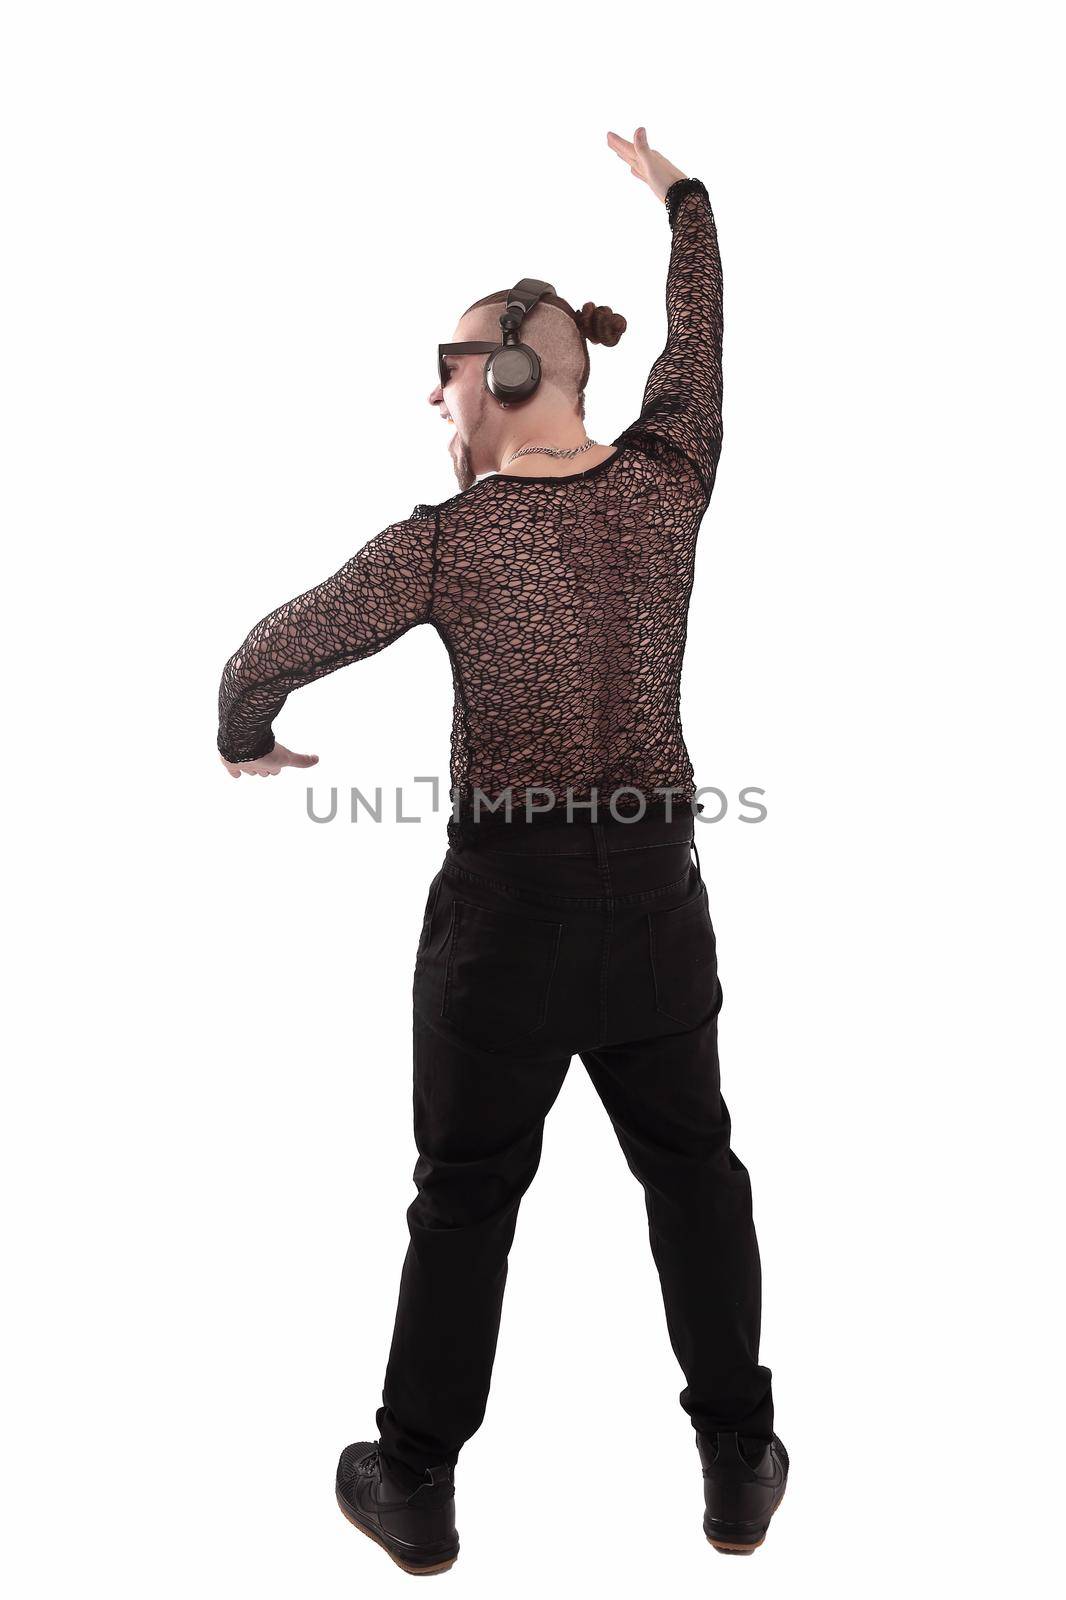 rear view .the guy rapper with a cool hair listens to music.isolated on white.photo with copy space